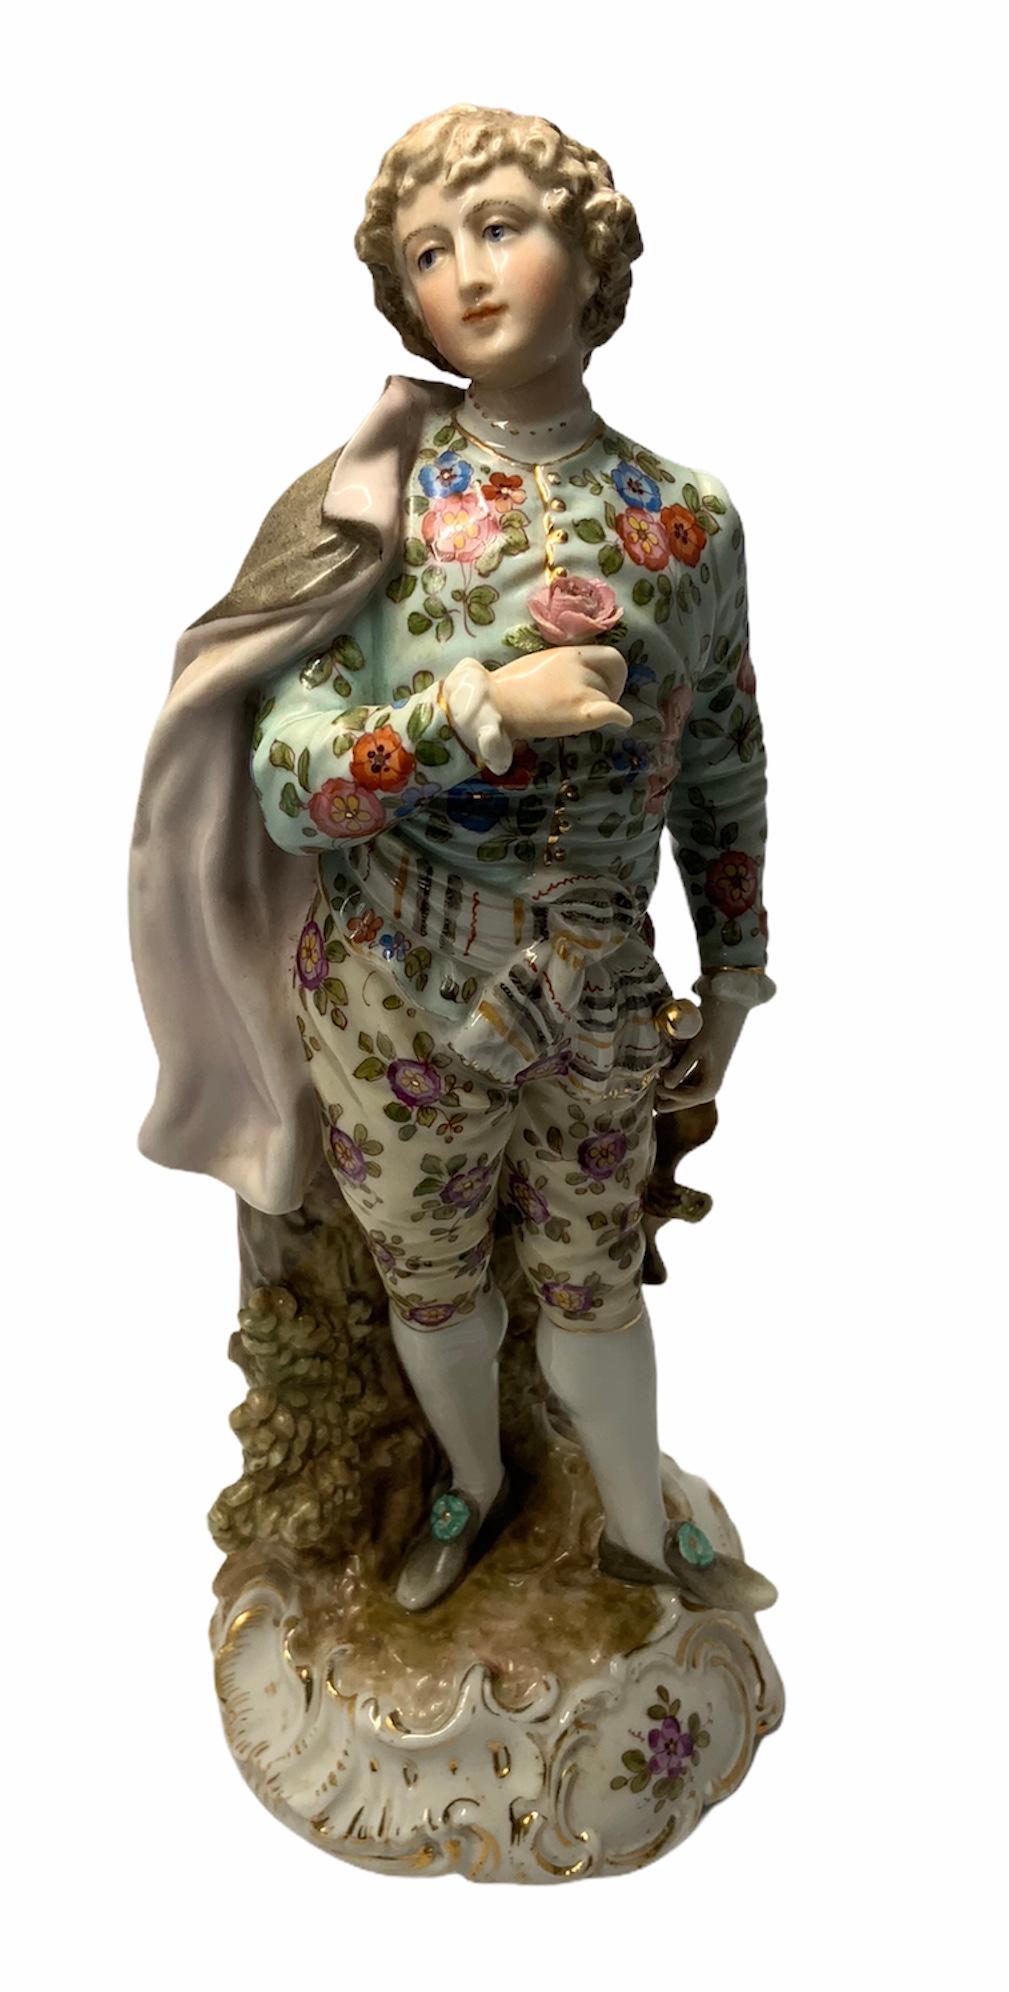 Volksted -Richard Eckert Porcelain Figurine In Good Condition For Sale In Guaynabo, PR